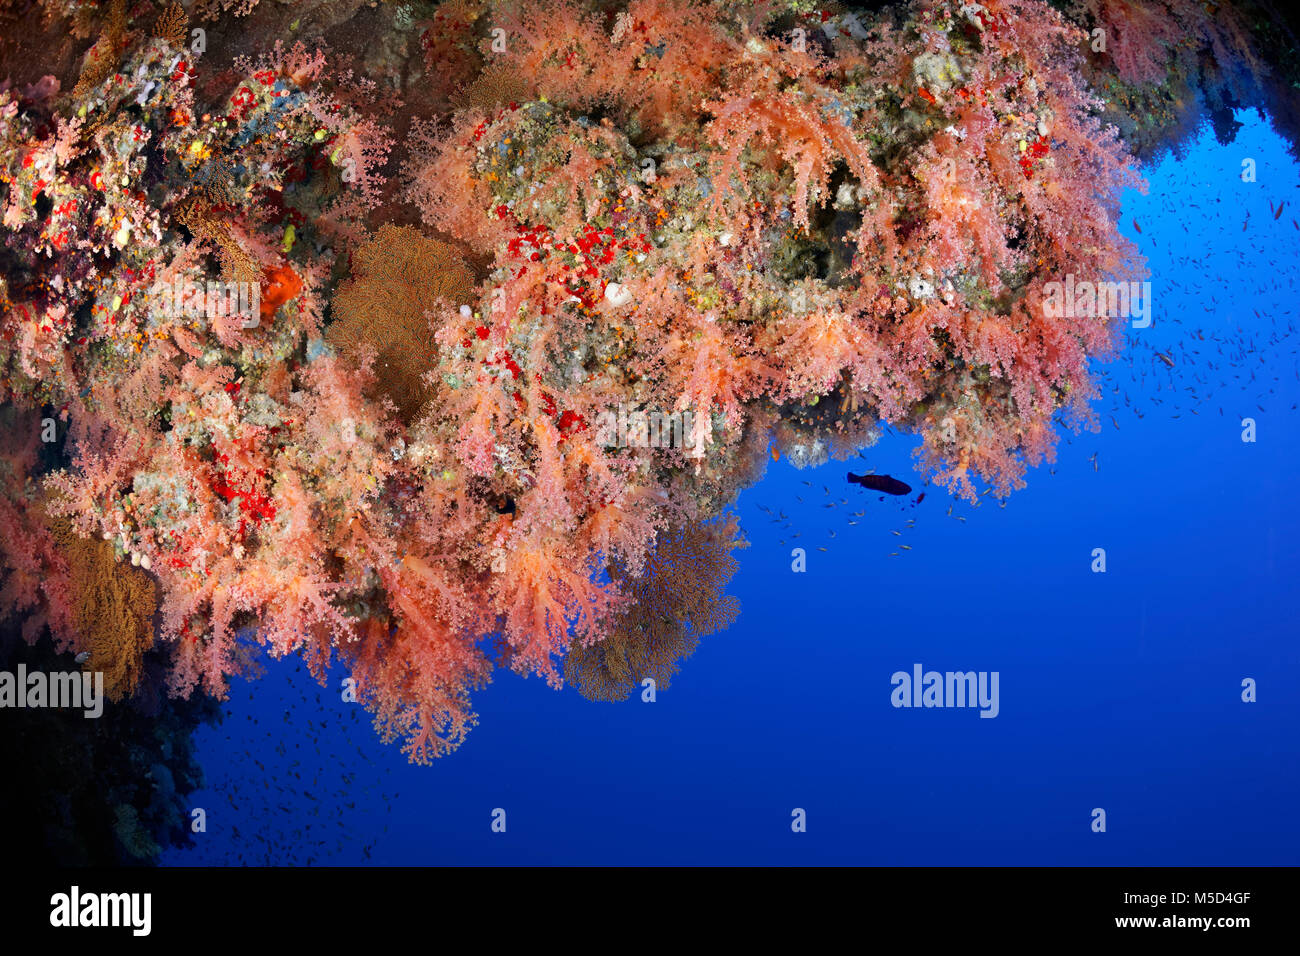 Coral reef, vegetation with different soft corals and sponges (Porifera), red, Red Sea, Egypt Stock Photo